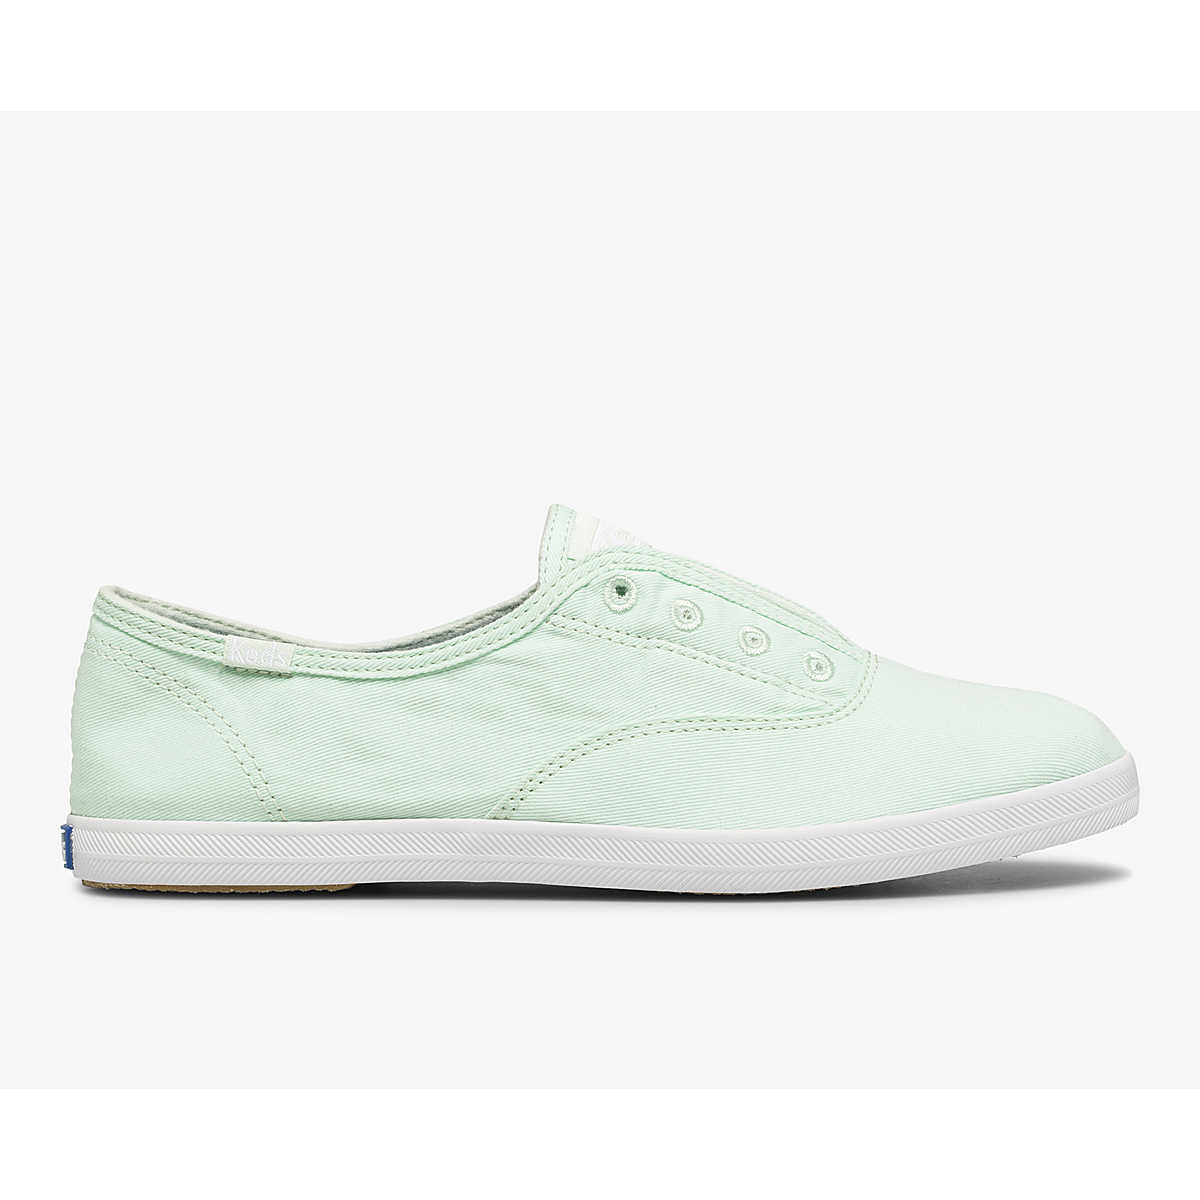 Keds Chillax Washable Feat. Organic Cotton In Light Teal